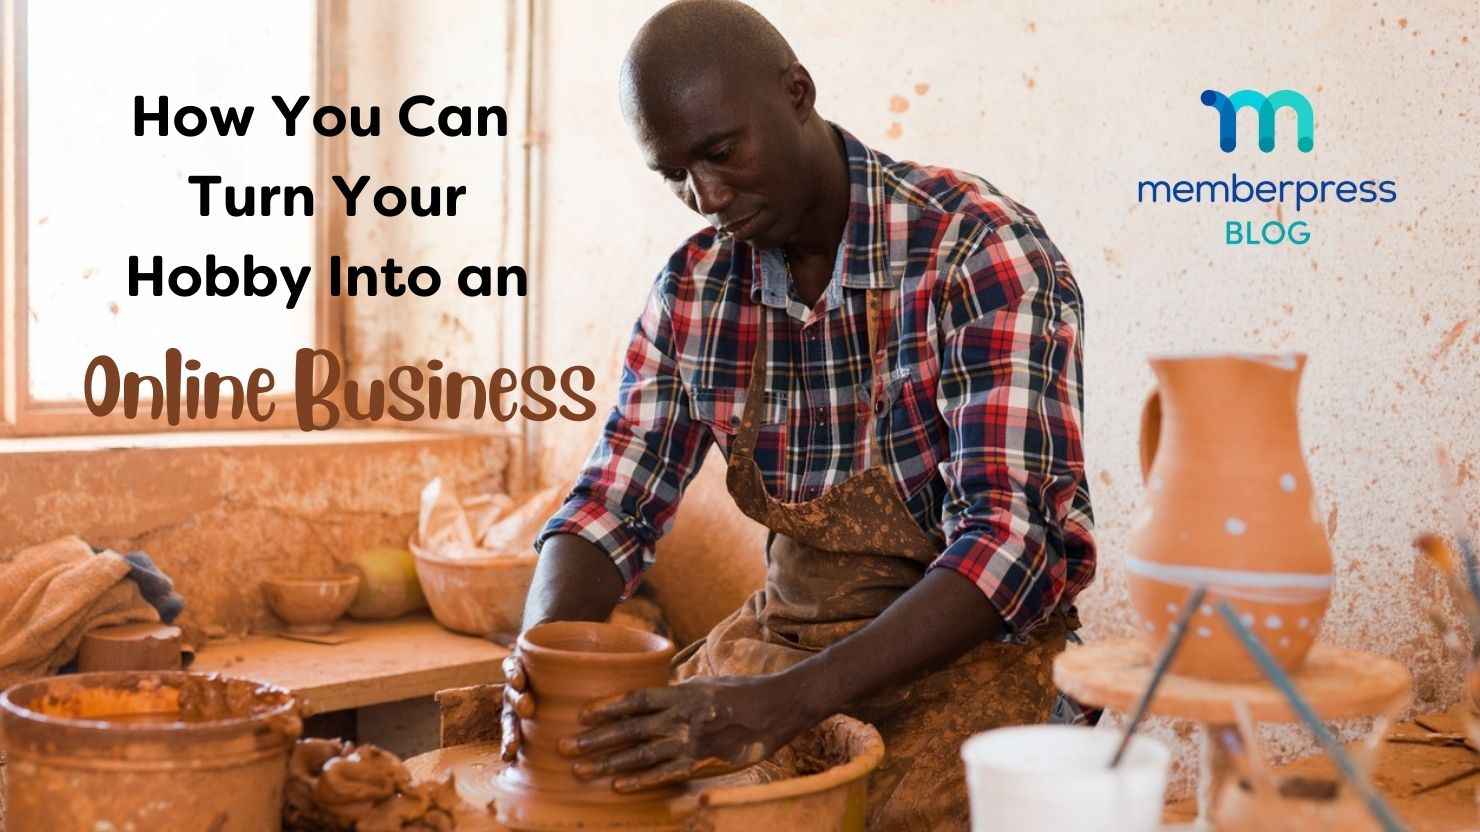 How to turn your hobby into a business online